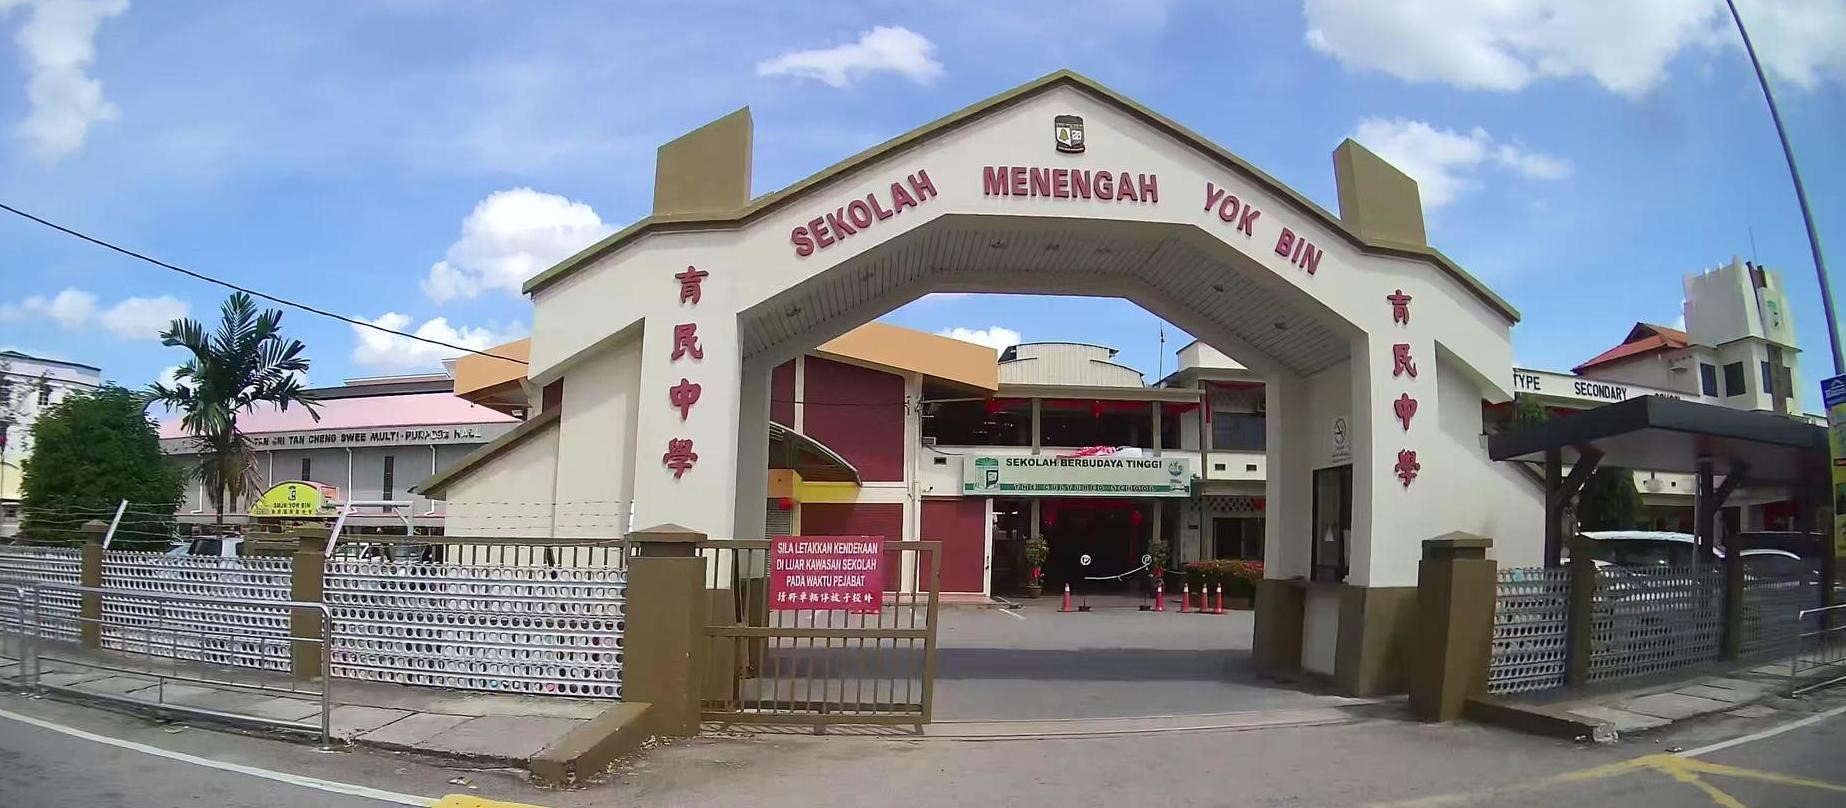 SMJK Yok Bin is a high school established in 1947. It’s located on Jalan Air Leleh, about 3 km from Melaka Town, Malaysia